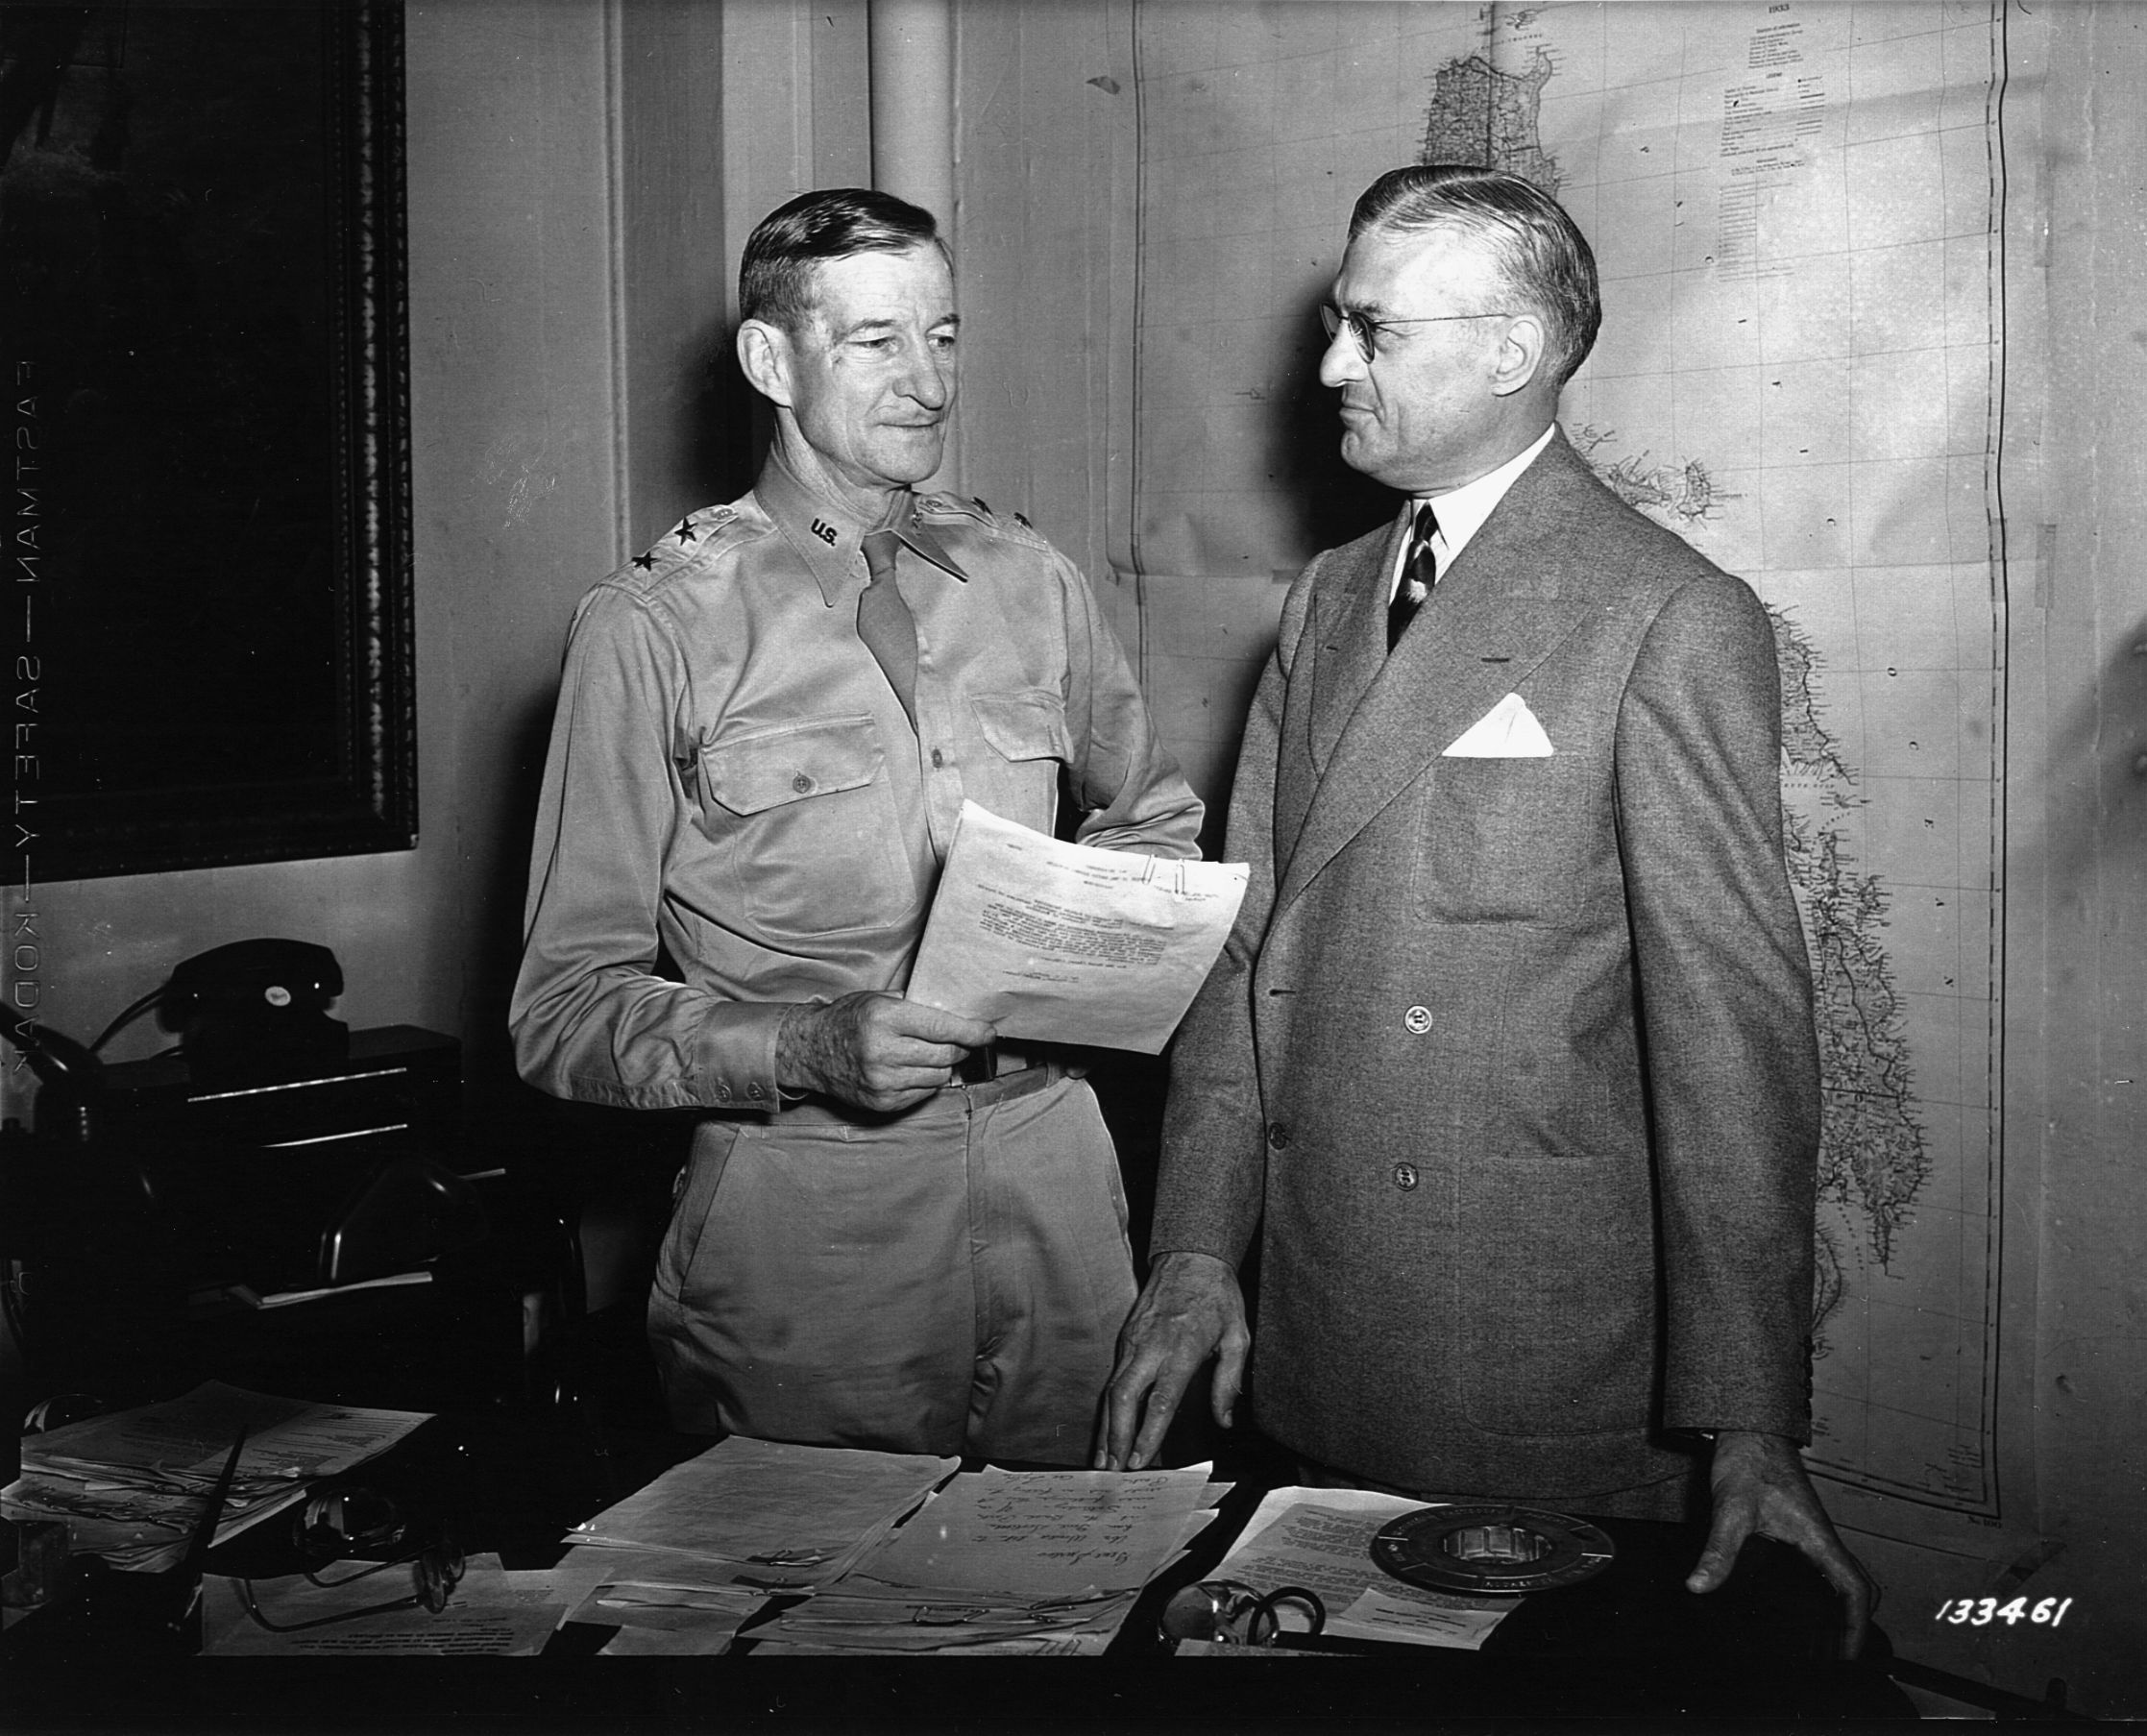 Major General Alexander D. Surles (left) confers with National League President Ford Fick in May 1942.